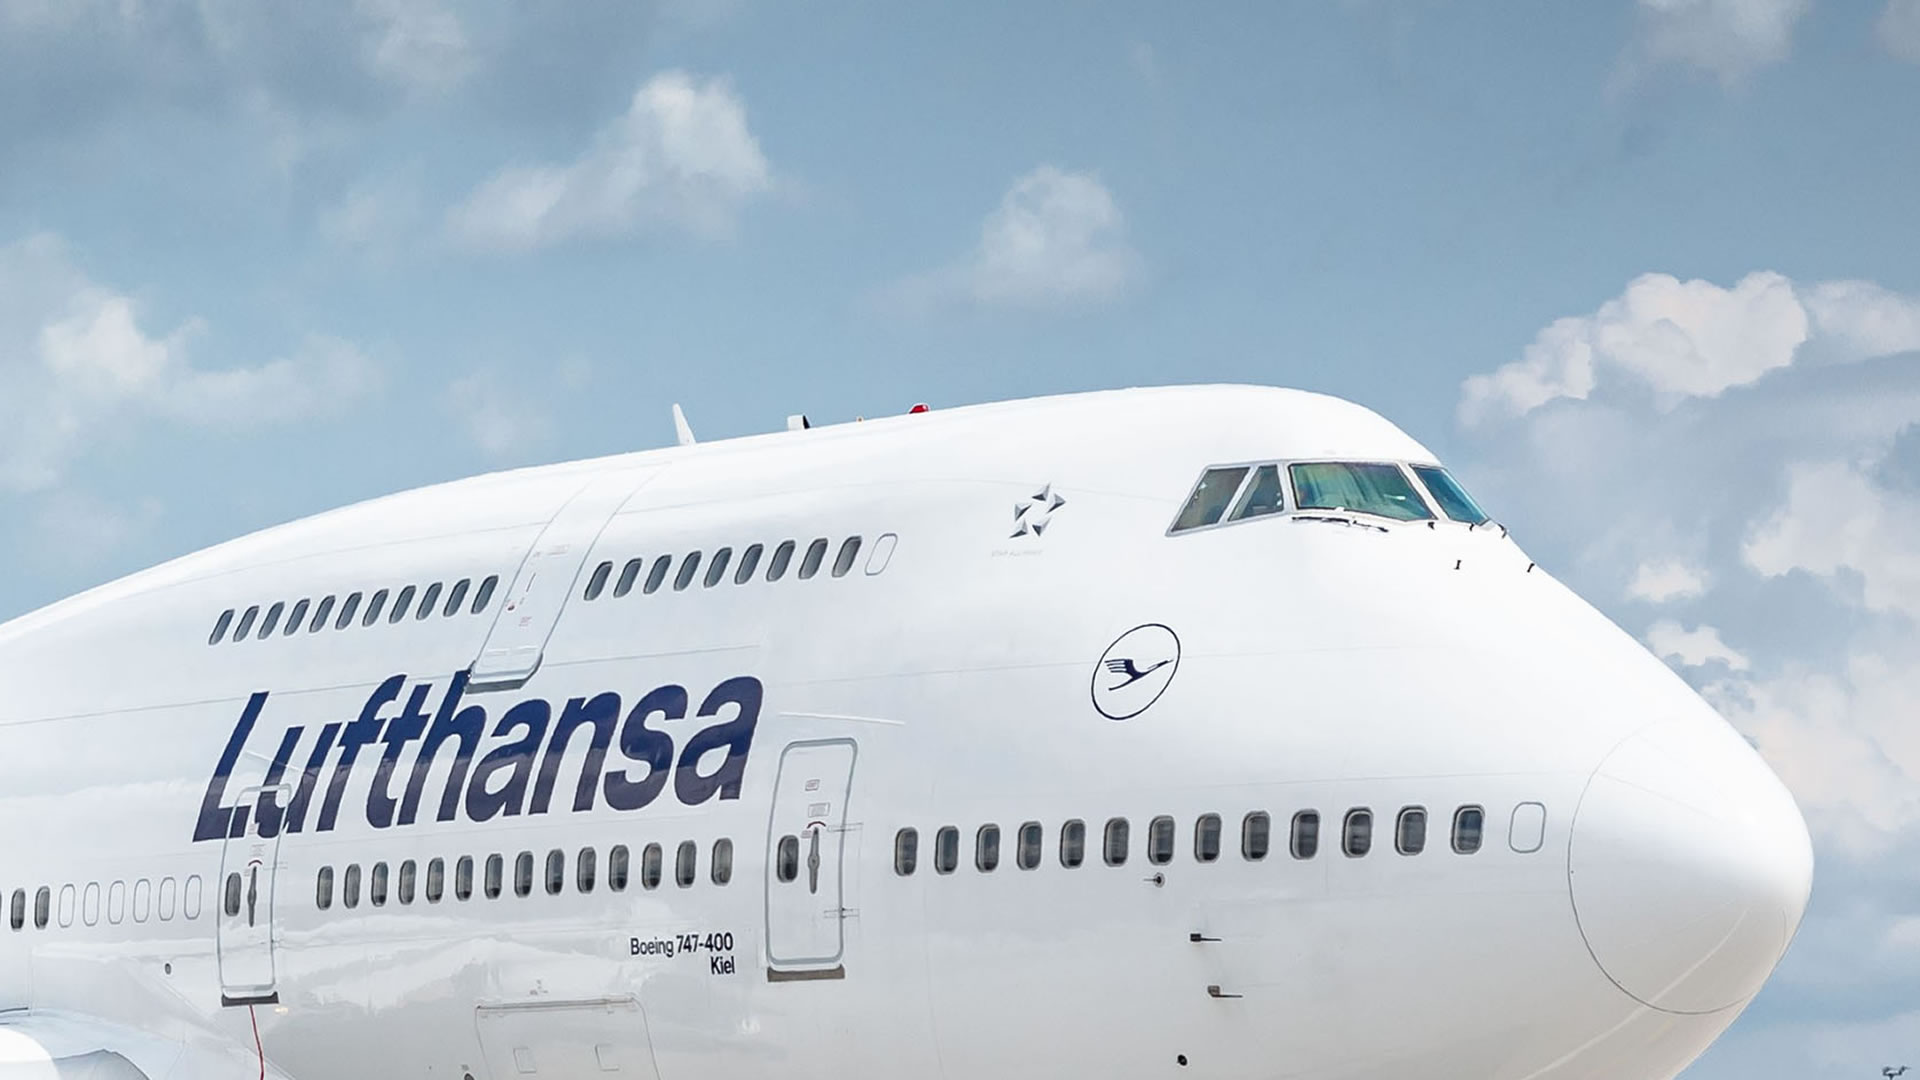 German Airline Giant Lufthansa and Its Destinations in Izmir